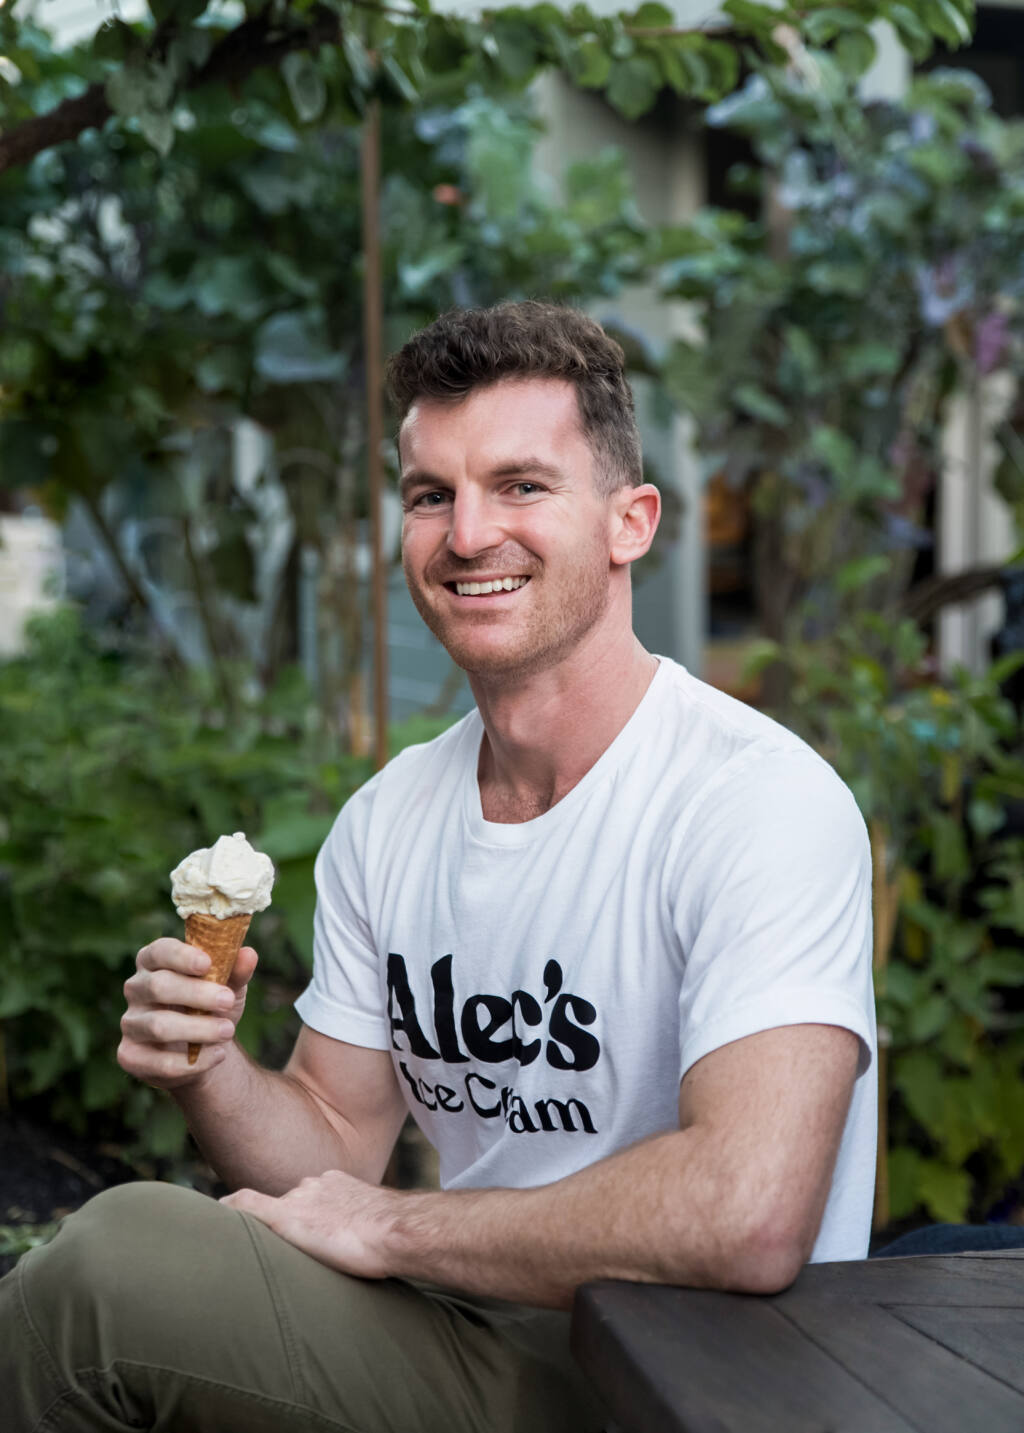 The founder and current CEO of the Spanish ice cream franchise